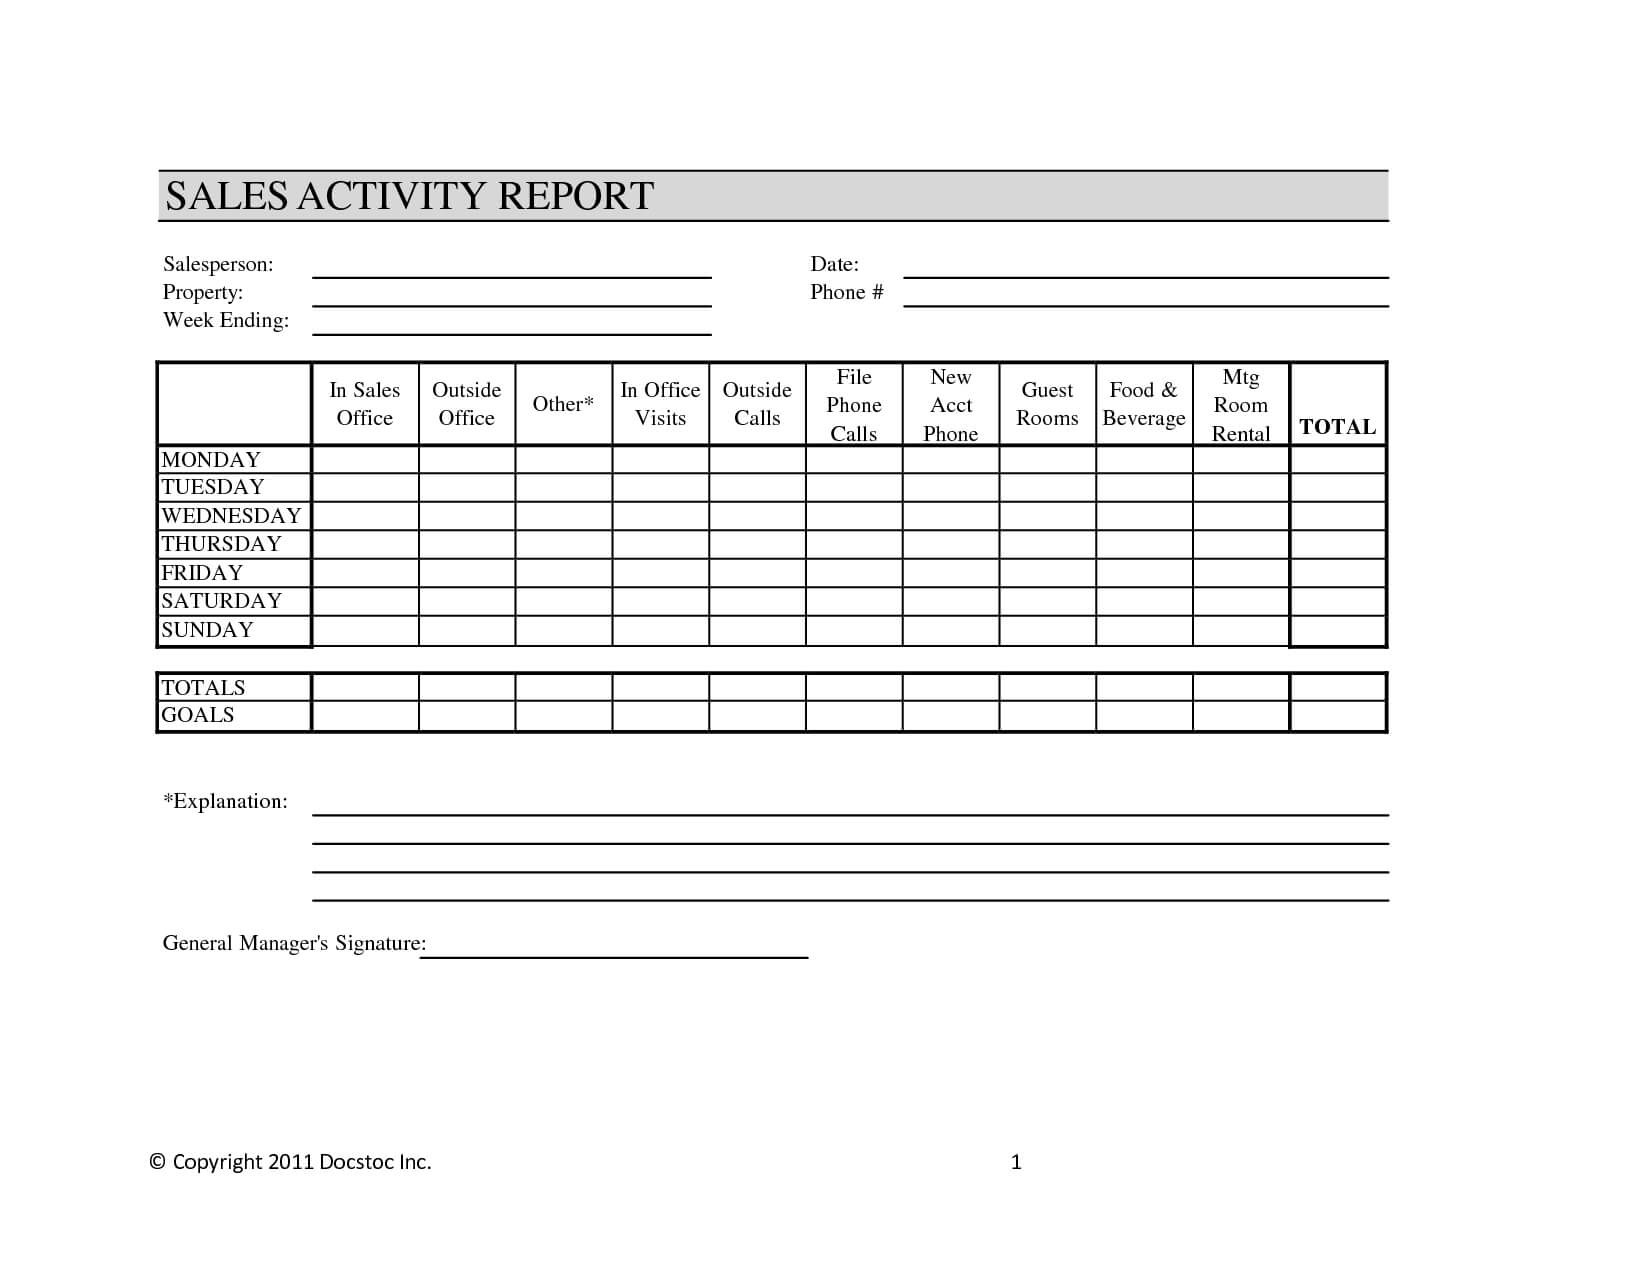 044 Daily Activity Report Template Weekly Sales Call 669158 Inside Sales Activity Report Template Excel